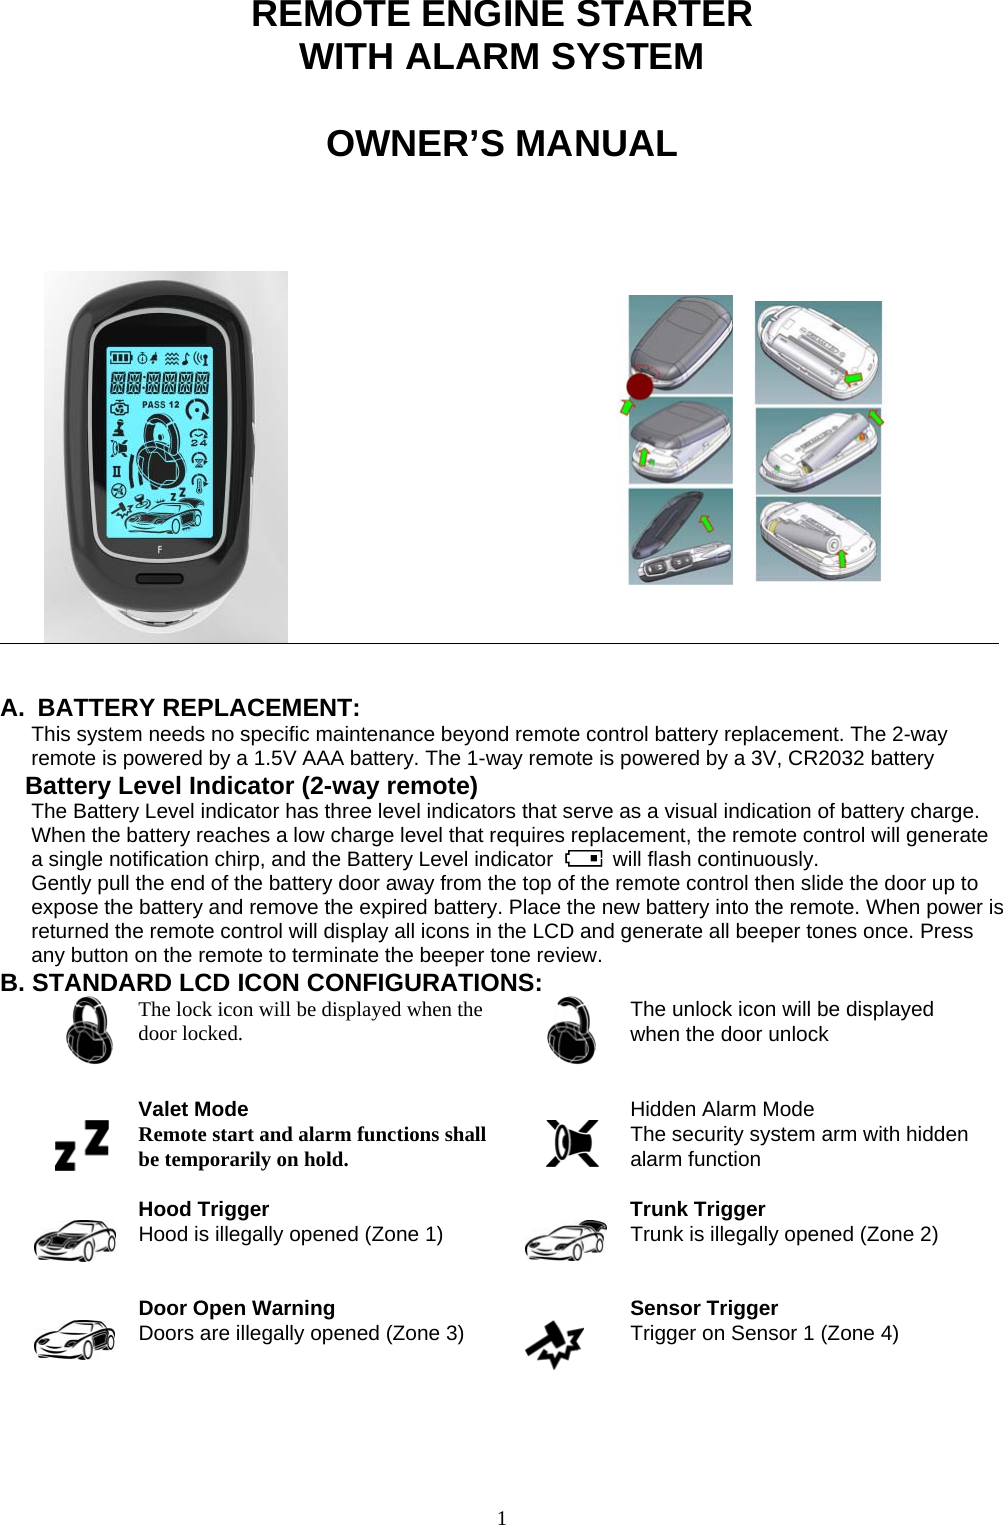                                                                           1                REMOTE ENGINE STARTER WITH ALARM SYSTEM  OWNER’S MANUAL                                                         A. BATTERY REPLACEMENT: This system needs no specific maintenance beyond remote control battery replacement. The 2-way remote is powered by a 1.5V AAA battery. The 1-way remote is powered by a 3V, CR2032 battery Battery Level Indicator (2-way remote) The Battery Level indicator has three level indicators that serve as a visual indication of battery charge. When the battery reaches a low charge level that requires replacement, the remote control will generate a single notification chirp, and the Battery Level indicator   will flash continuously. Gently pull the end of the battery door away from the top of the remote control then slide the door up to expose the battery and remove the expired battery. Place the new battery into the remote. When power is returned the remote control will display all icons in the LCD and generate all beeper tones once. Press any button on the remote to terminate the beeper tone review. B. STANDARD LCD ICON CONFIGURATIONS:  The lock icon will be displayed when the door locked.     The unlock icon will be displayed when the door unlock   Valet Mode Remote start and alarm functions shall be temporarily on hold.   Hidden Alarm Mode The security system arm with hidden alarm function   Hood Trigger Hood is illegally opened (Zone 1)    Trunk Trigger Trunk is illegally opened (Zone 2)   Door Open Warning  Doors are illegally opened (Zone 3)    Sensor Trigger Trigger on Sensor 1 (Zone 4)   